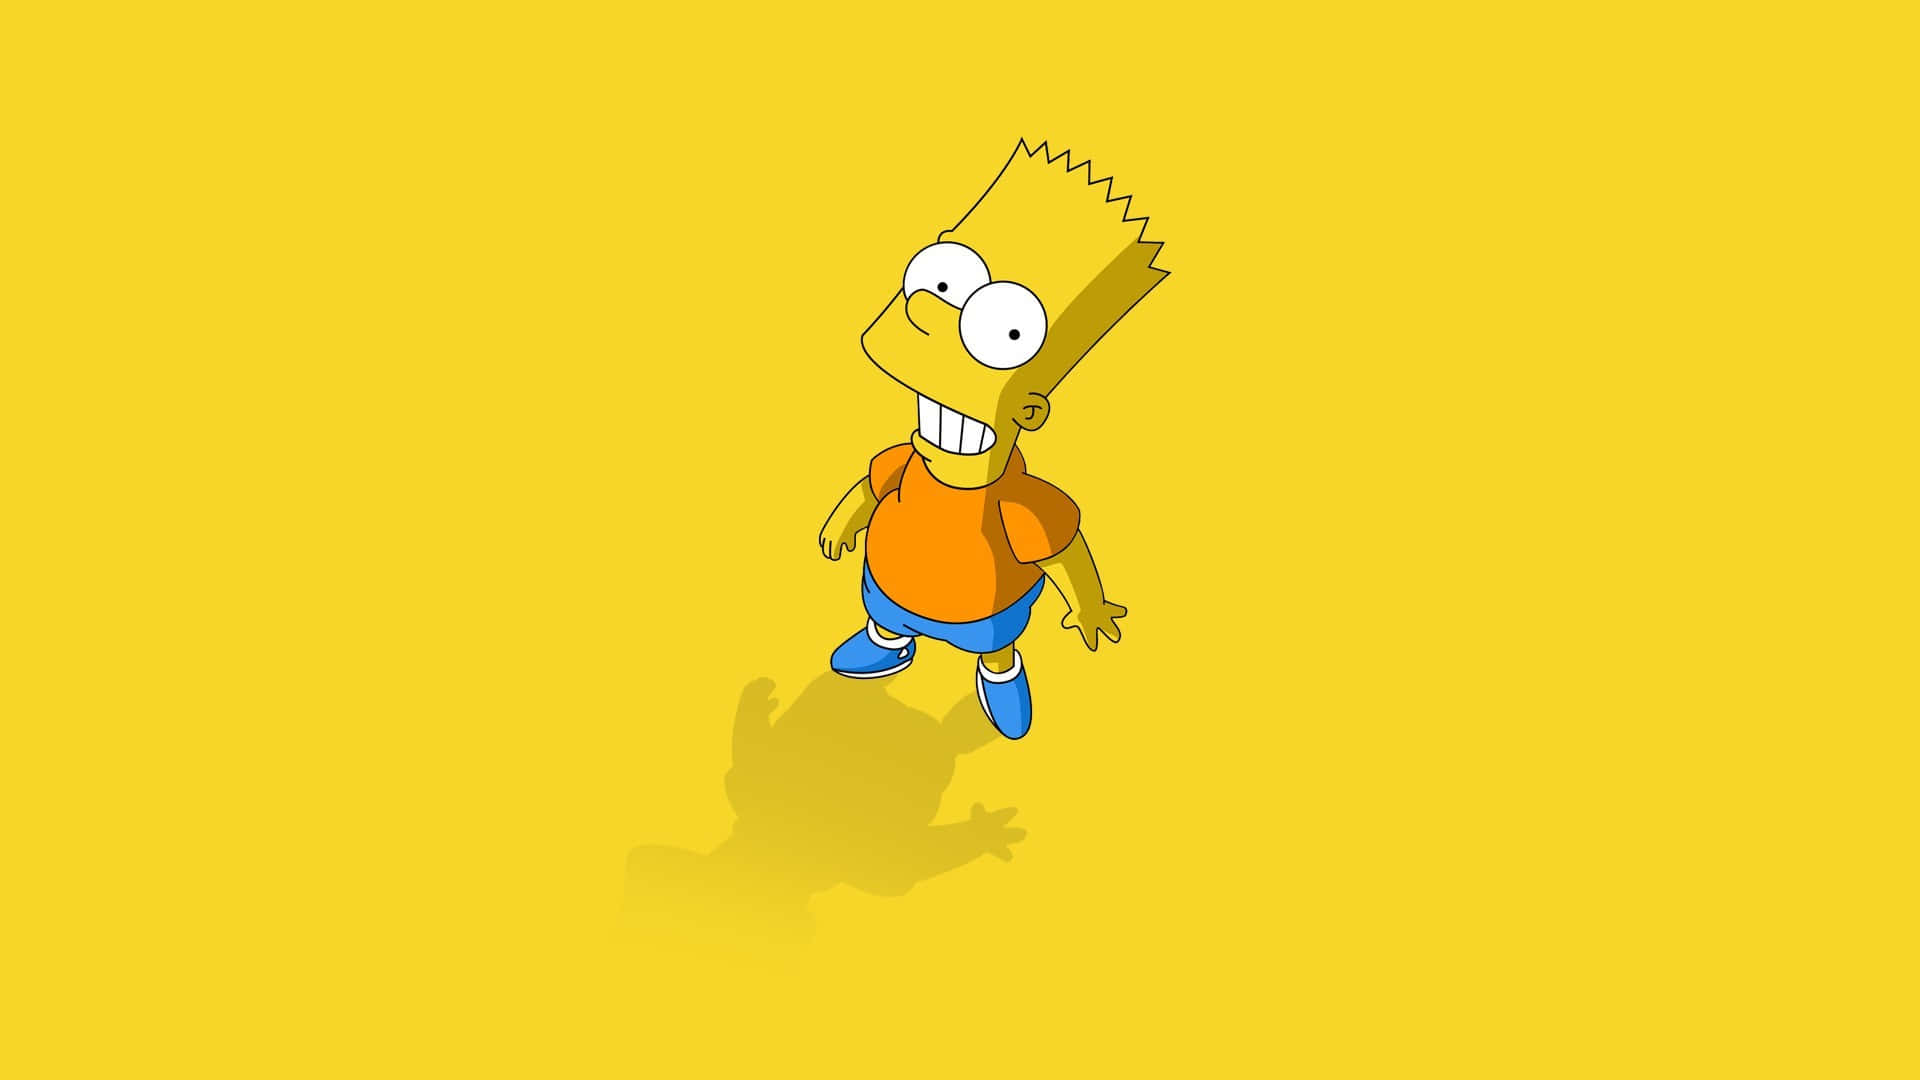 Bart Simpson and his friends having fun in the popular show, The Simpsons